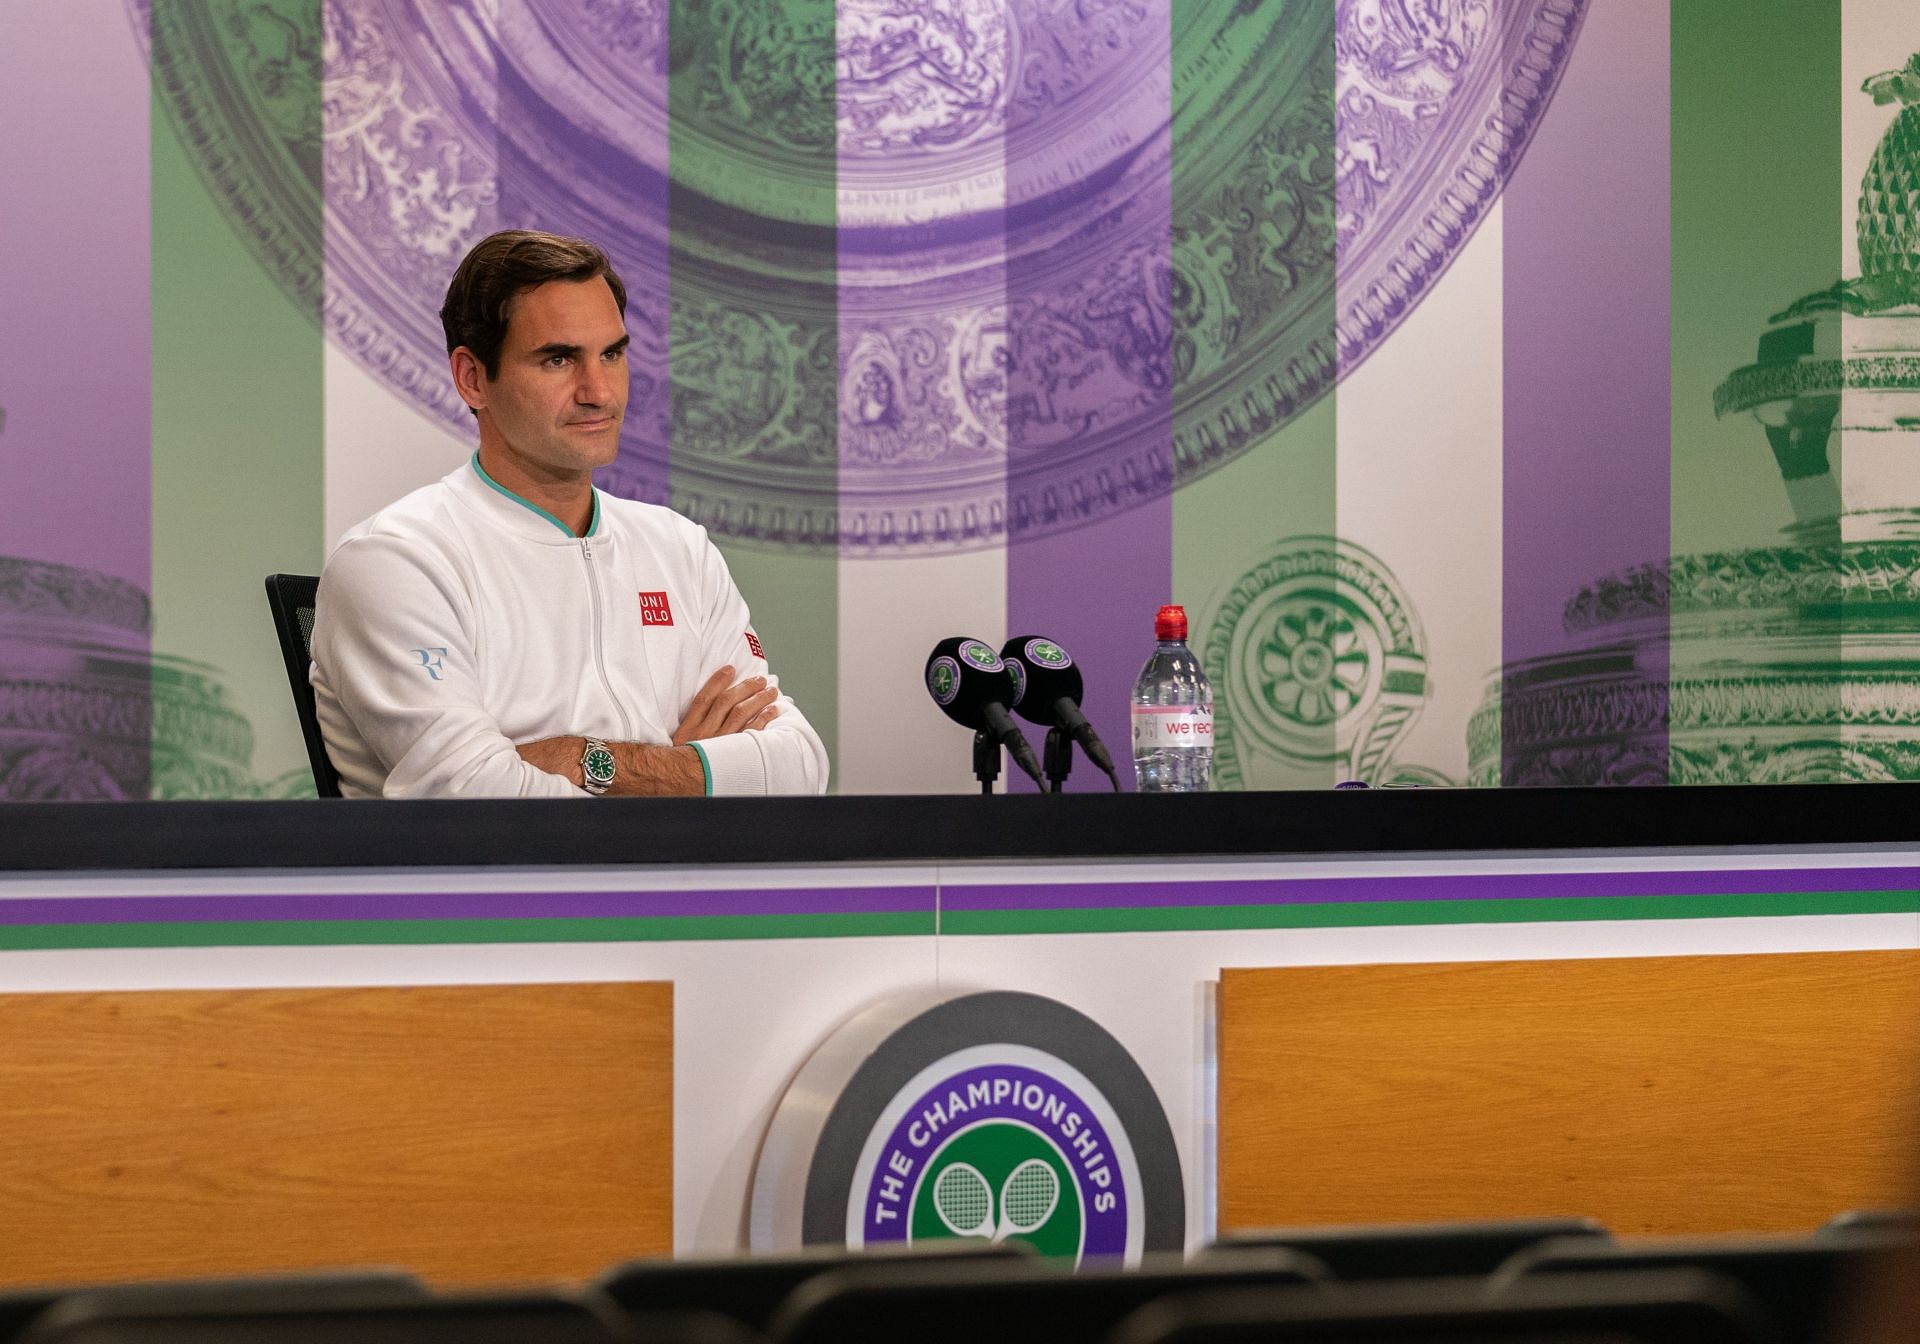 Roger Federer lost in straight sets at the 2021 Wimbledon Championships to Hubert Hurkacz